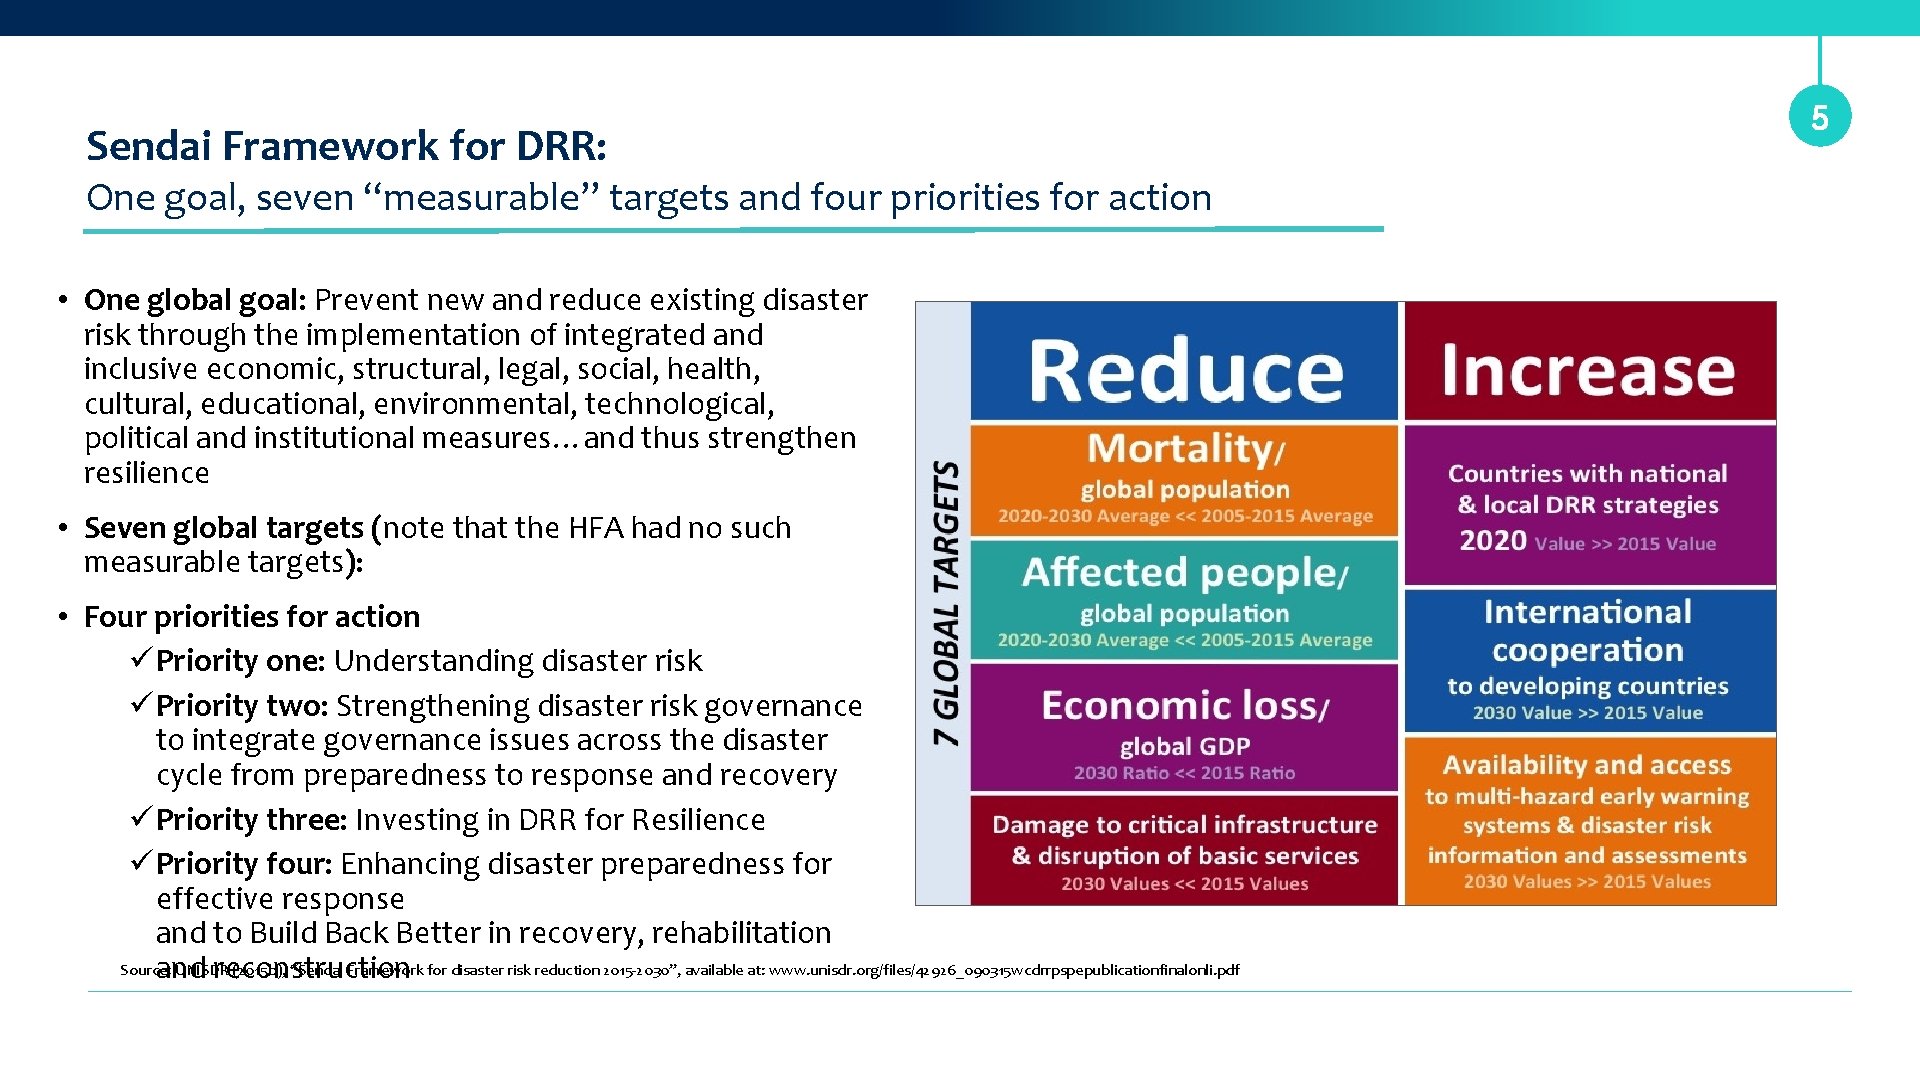 Sendai Framework for DRR: One goal, seven “measurable” targets and four priorities for action